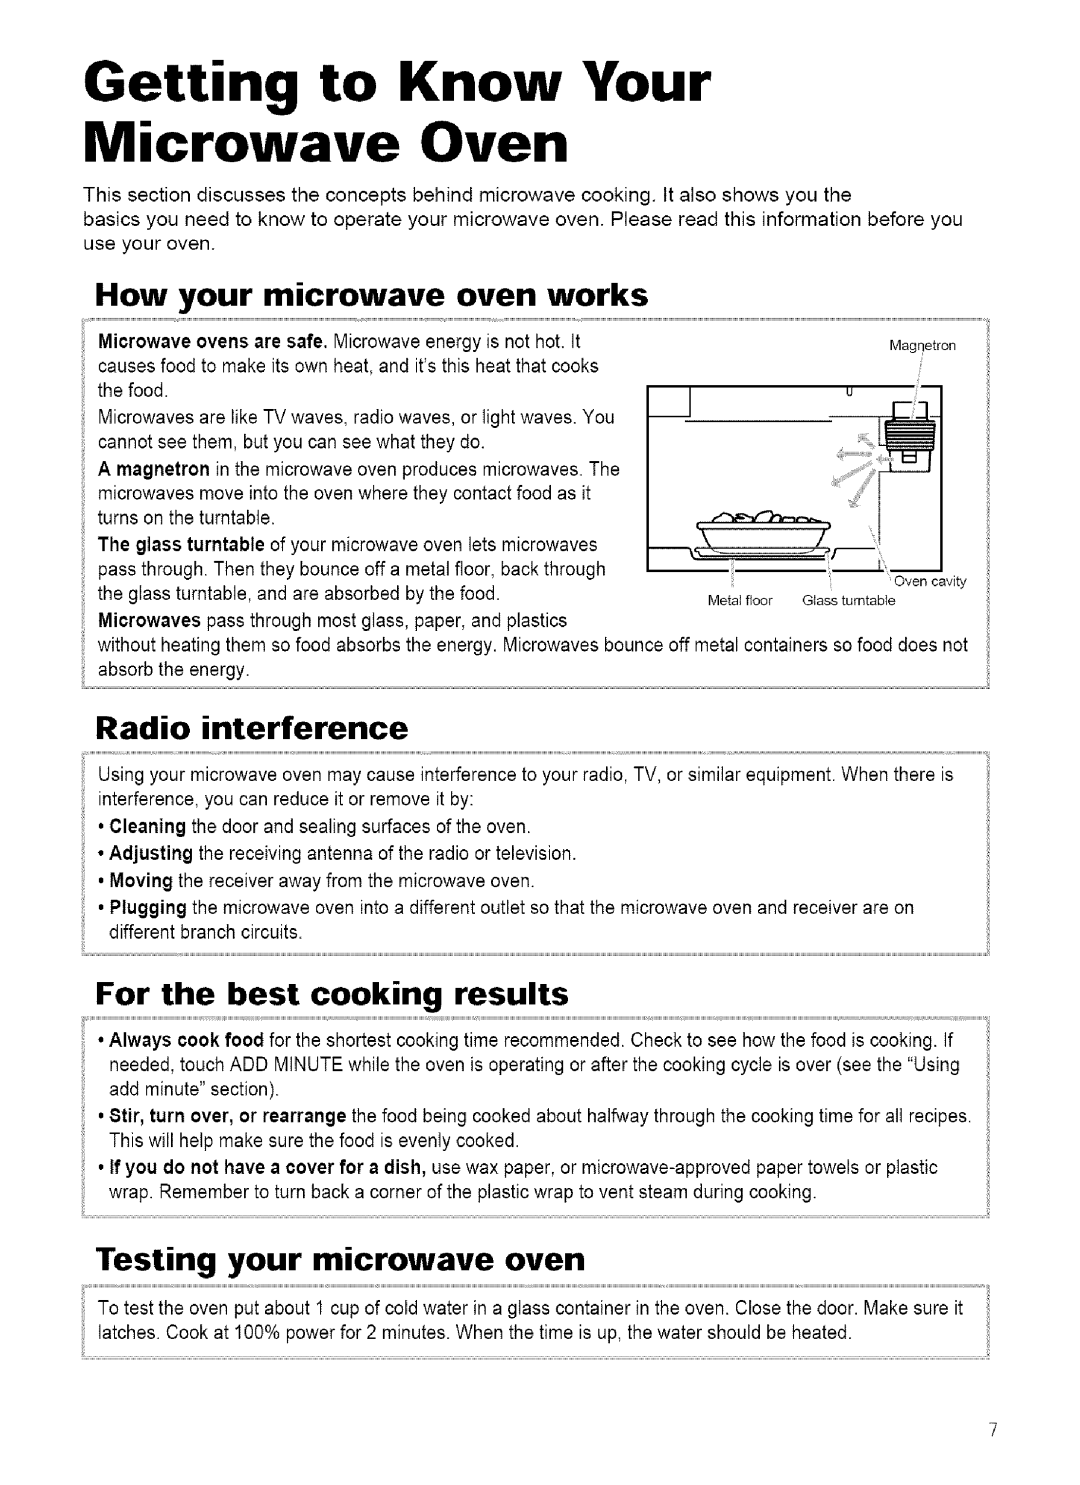 Kenmore 721.62759 manual Getting to Know Your Microwave Oven, How your microwave, oven works, Testing your microwave oven 